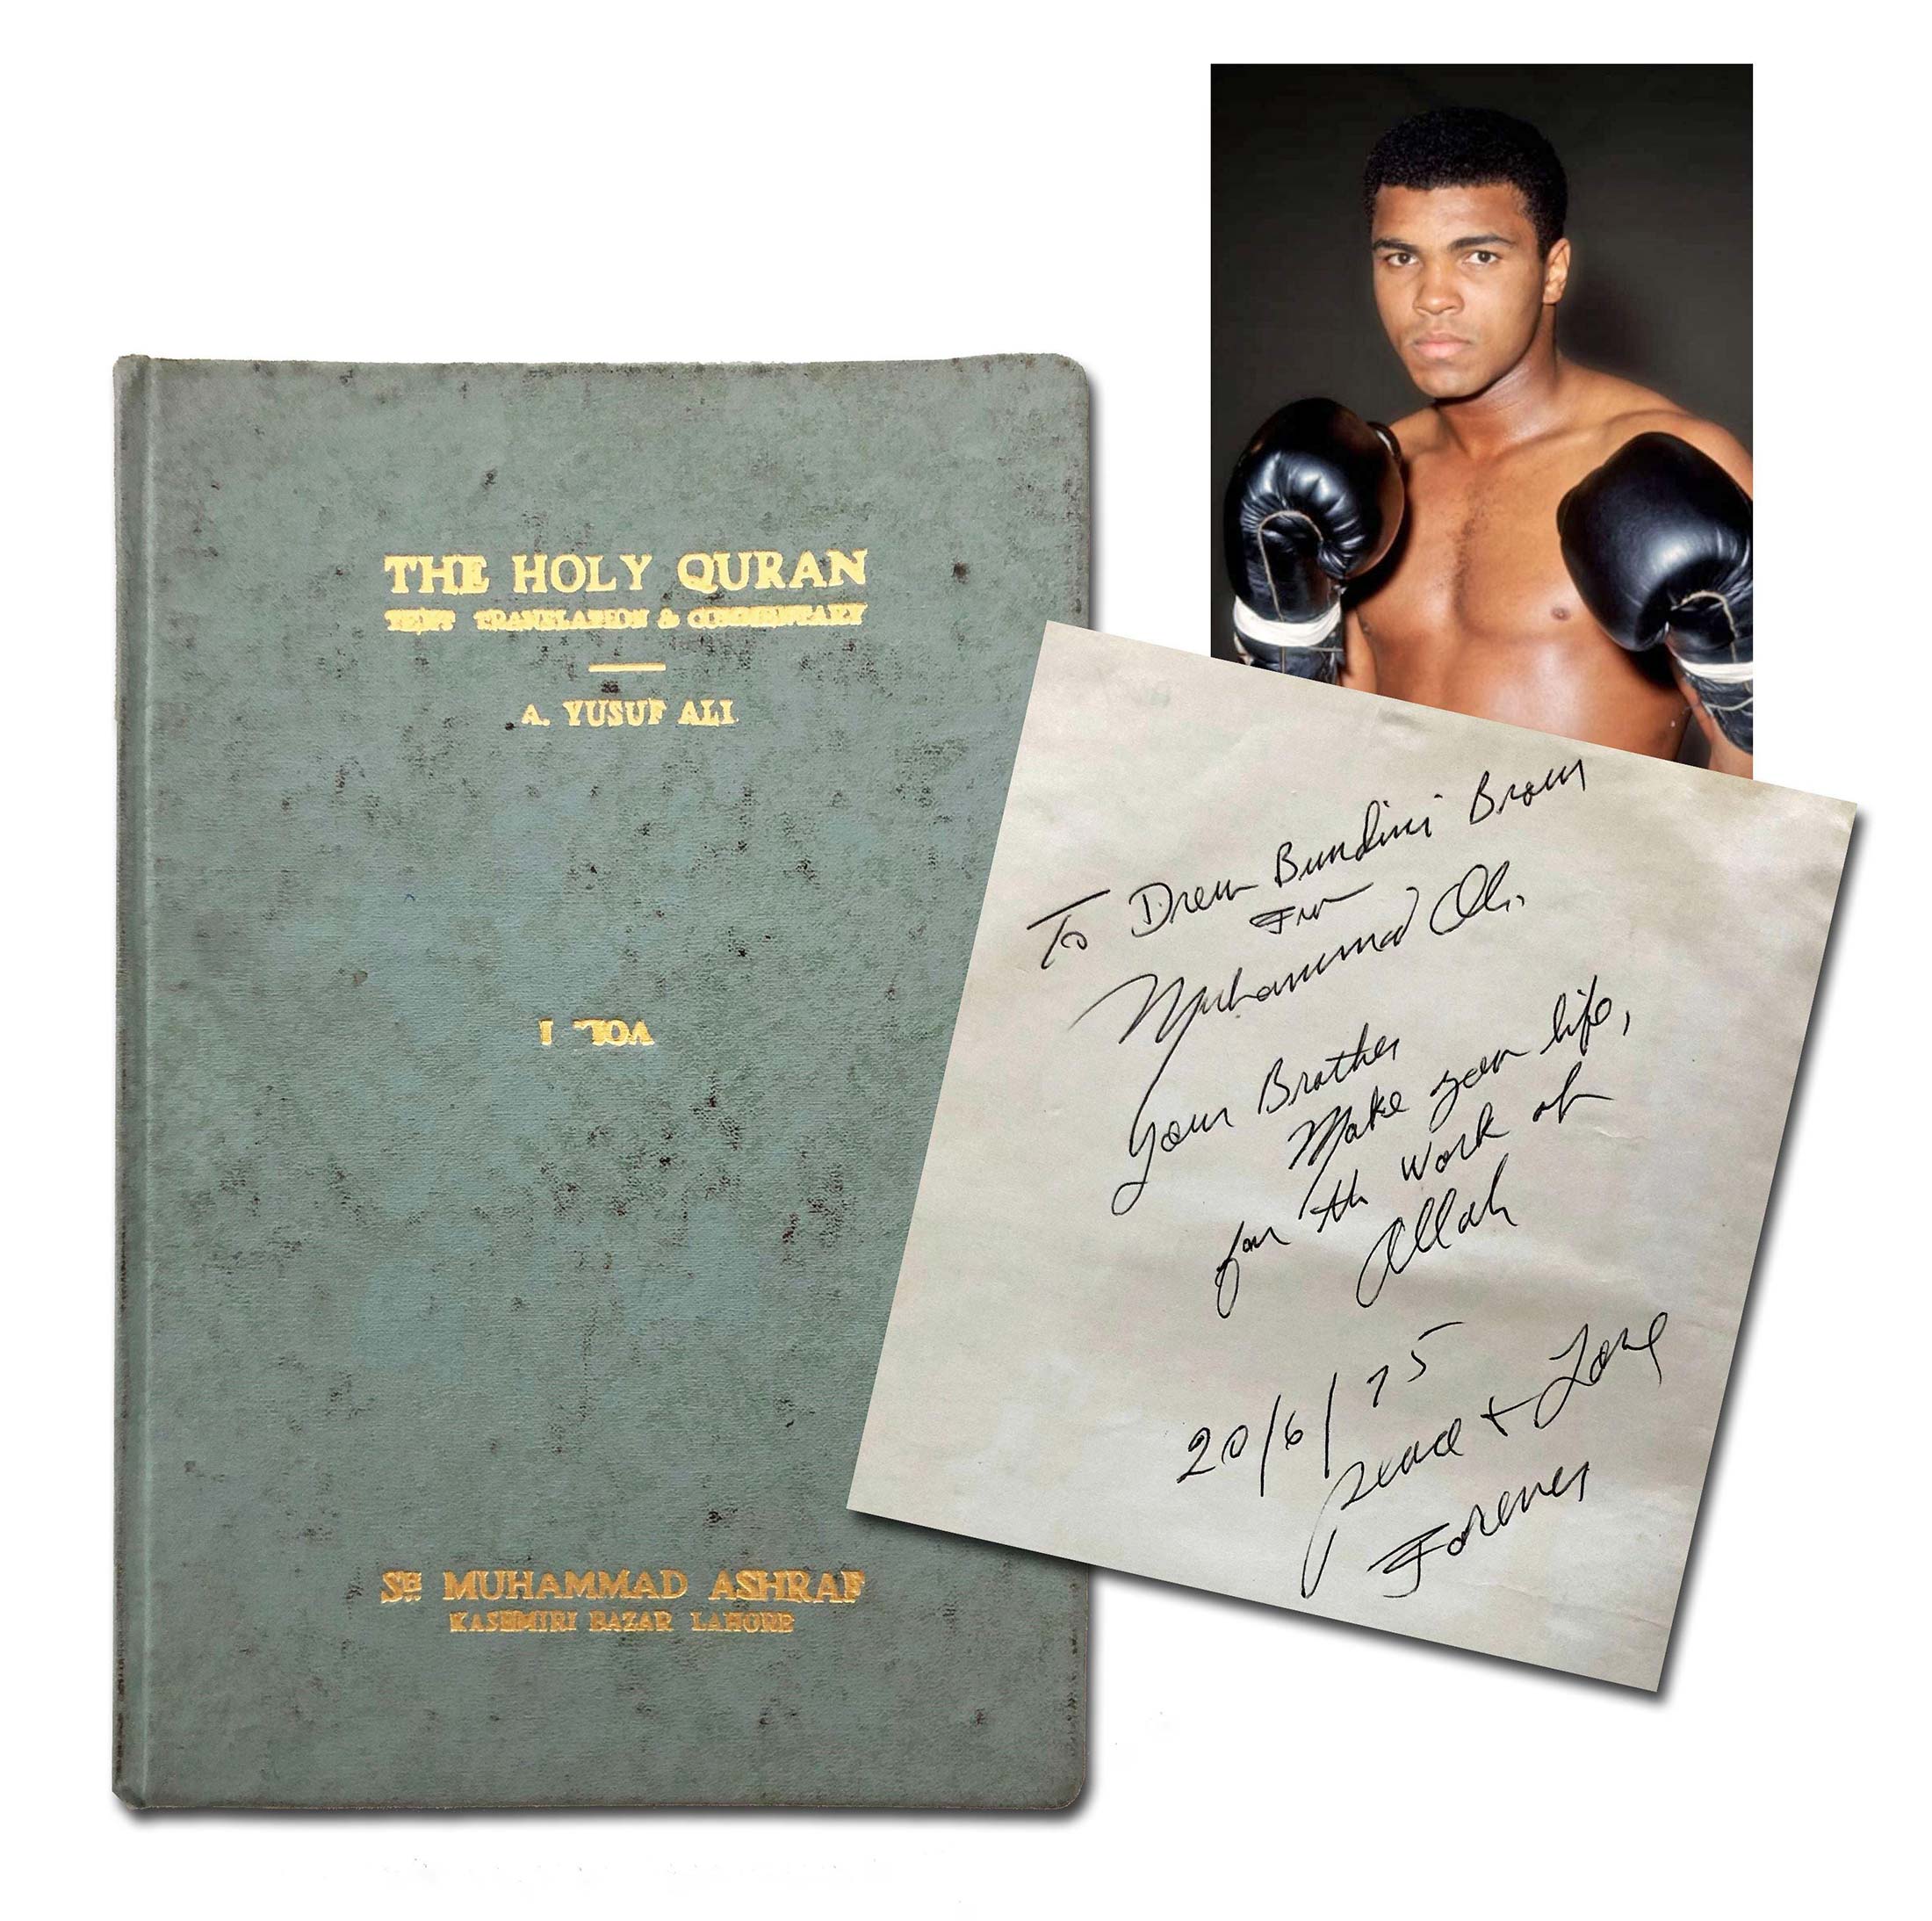 Presentation copy of The Holy Quran, signed and inscribed by Muhammad Ali to Drew Brown, Ali’s longtime friend, adviser and corner man ($9,000-$10,000).